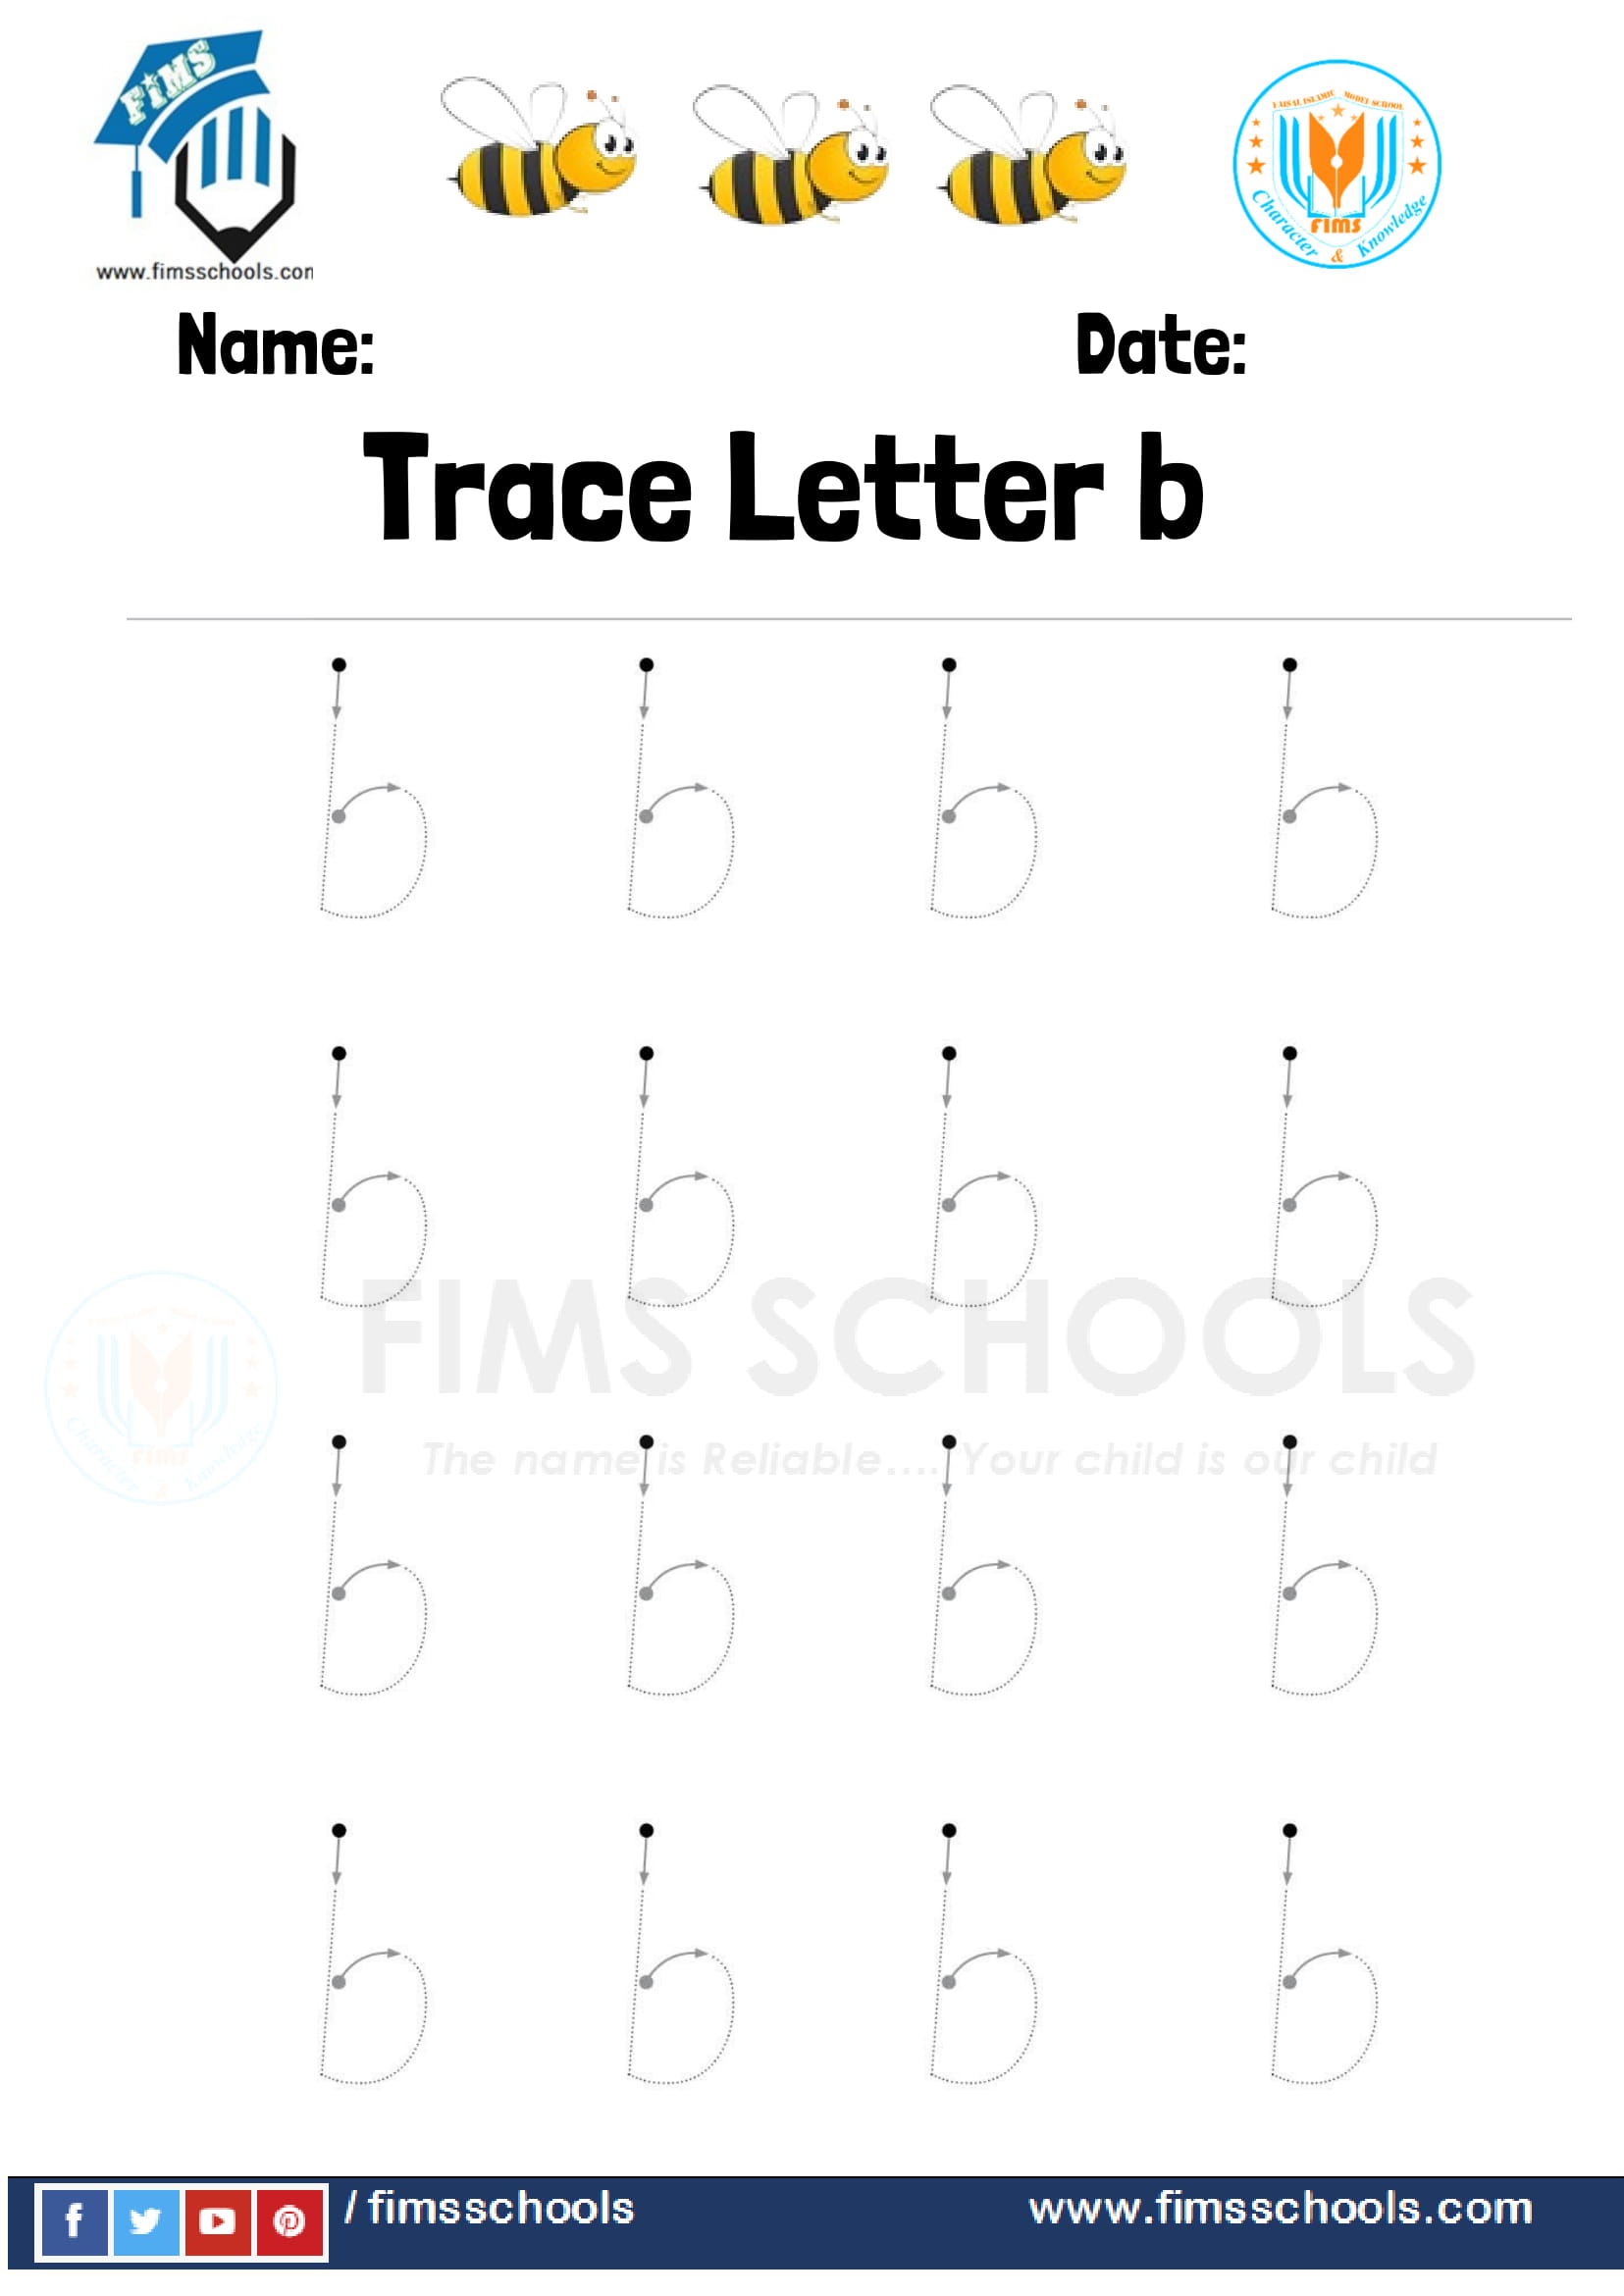 Fims Trace Letter b- 6-1